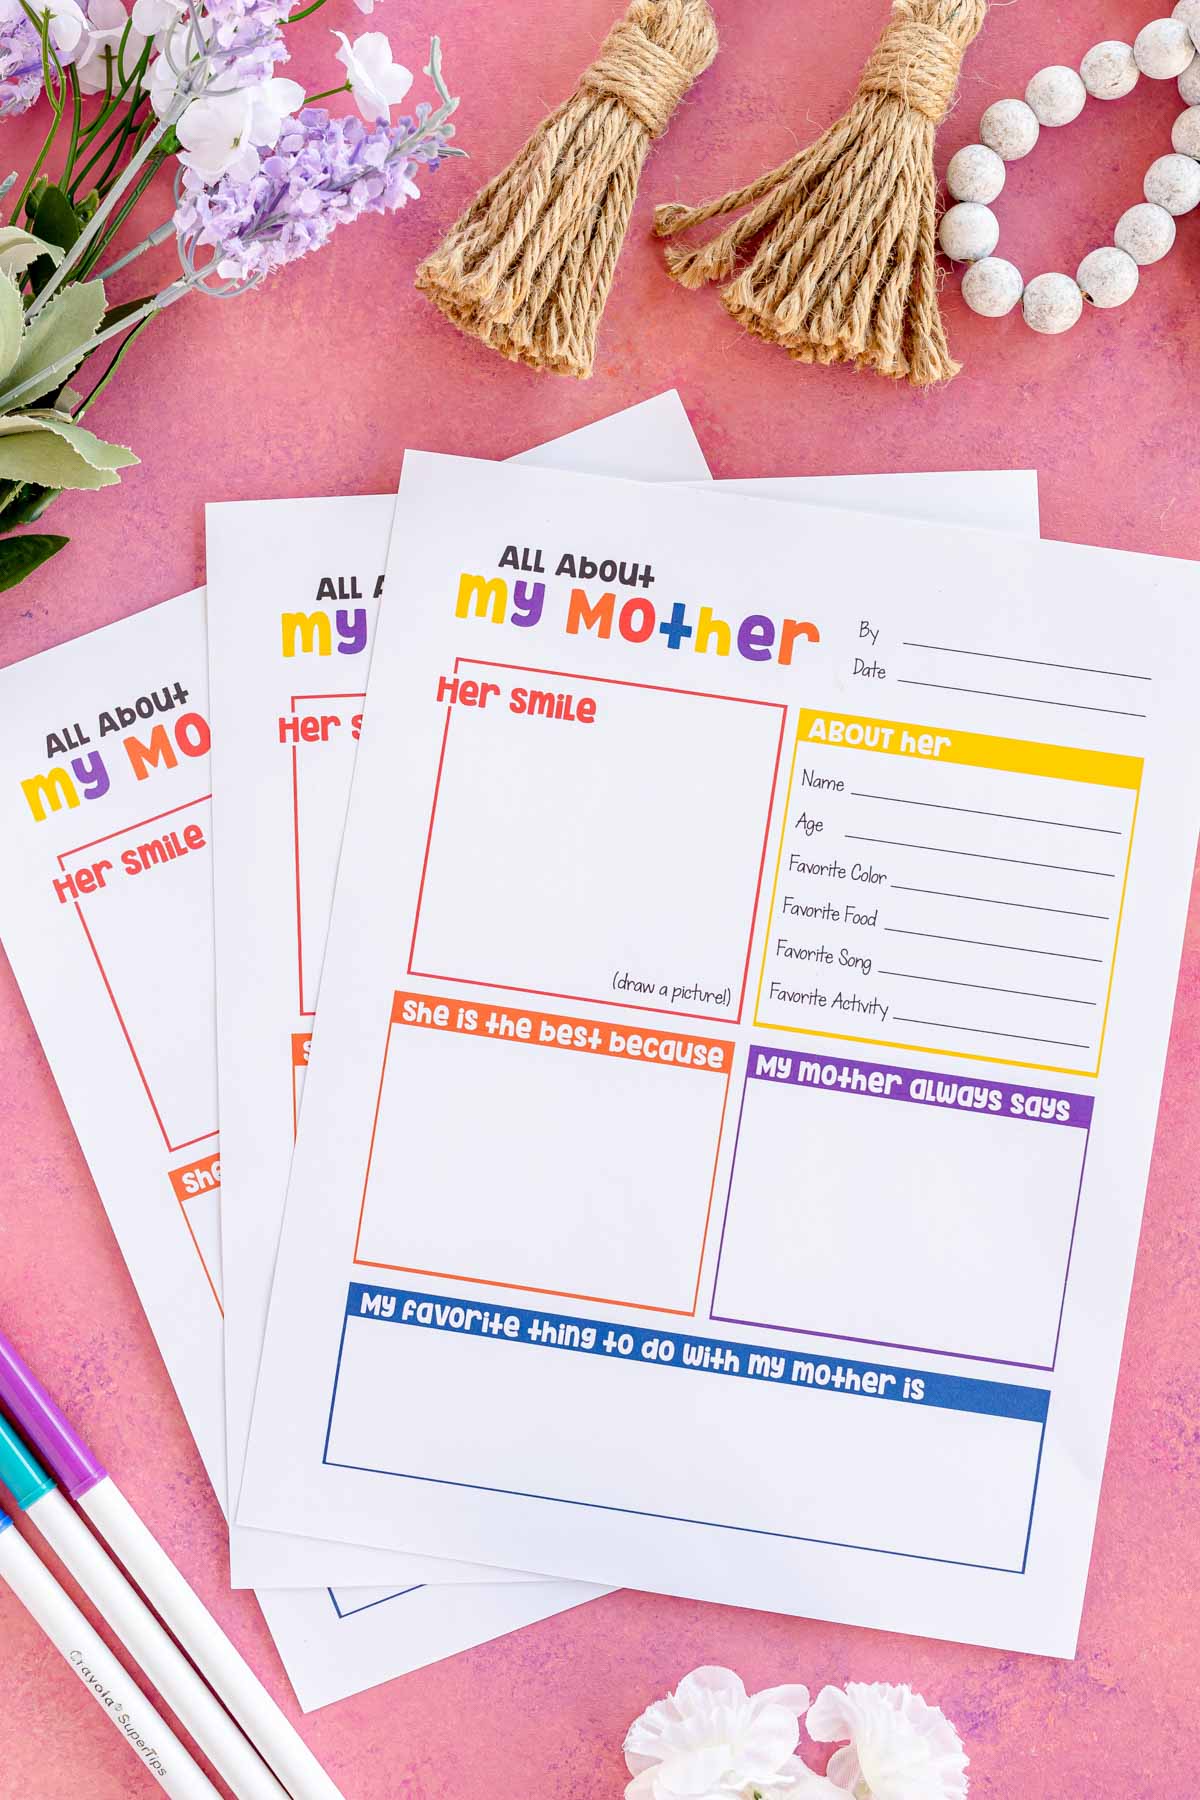 printed out all about my mom printable sheets